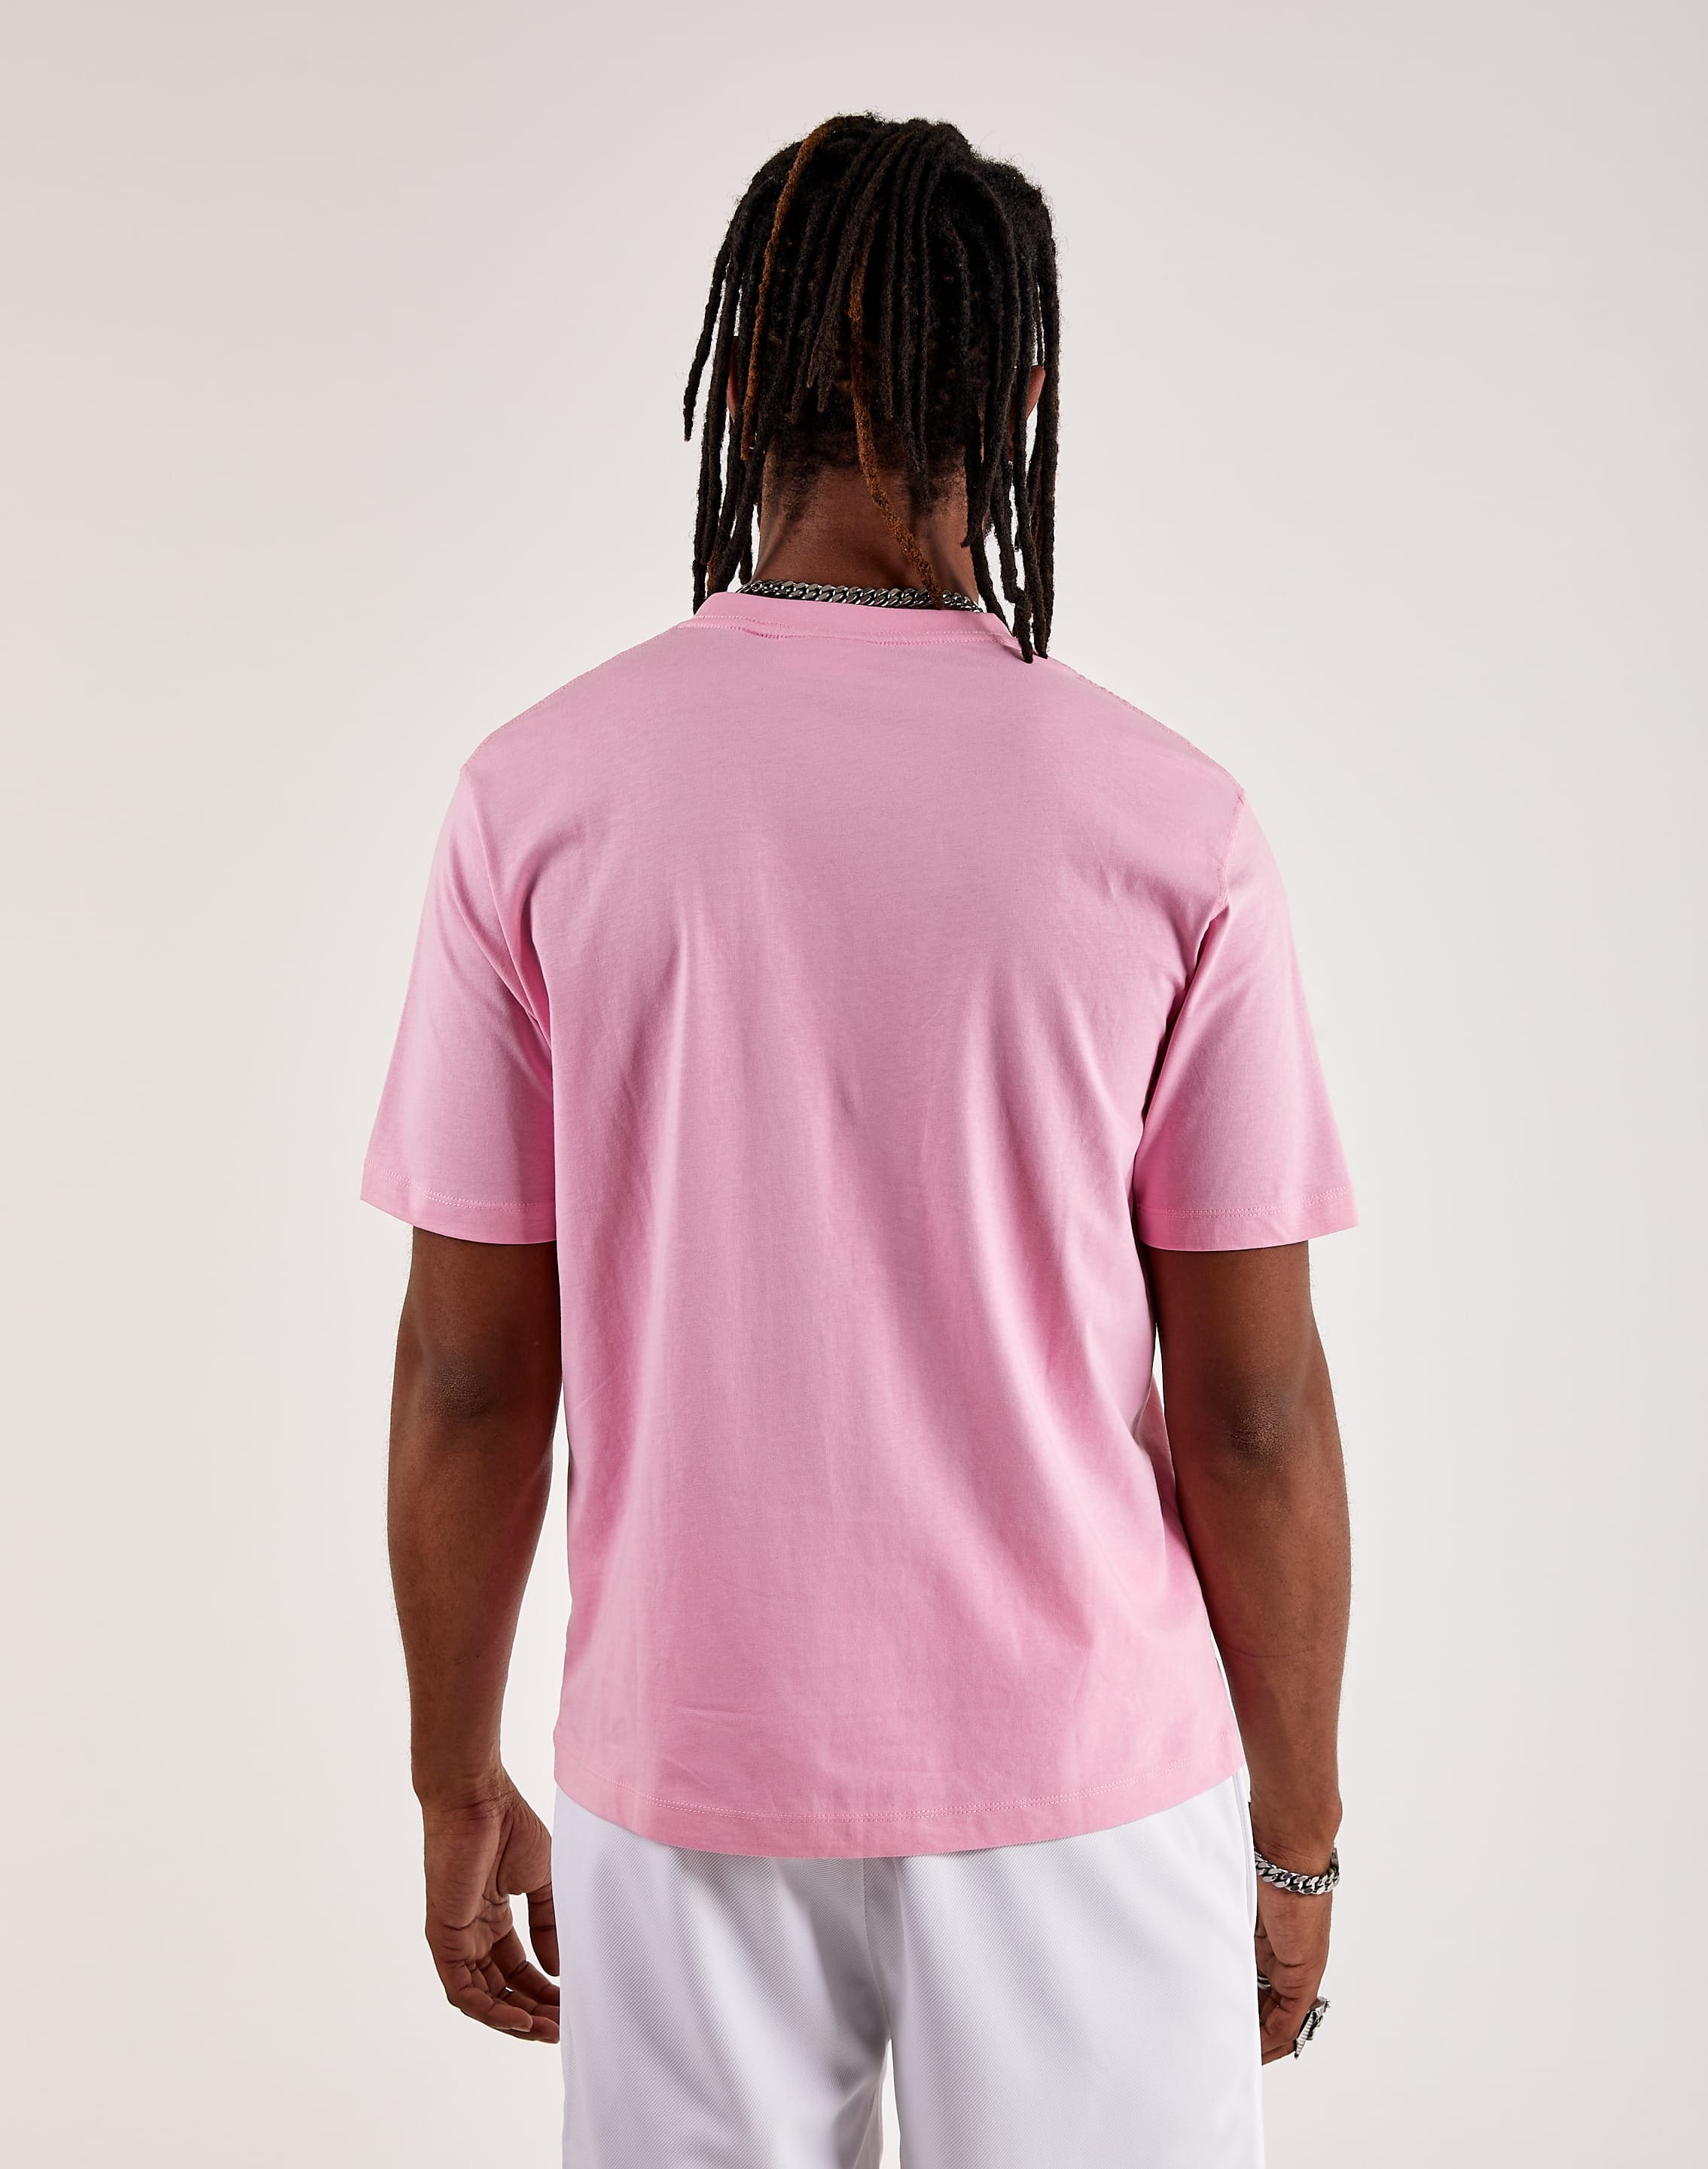 Sergio Tacchini Arch Type Tee – DTLR